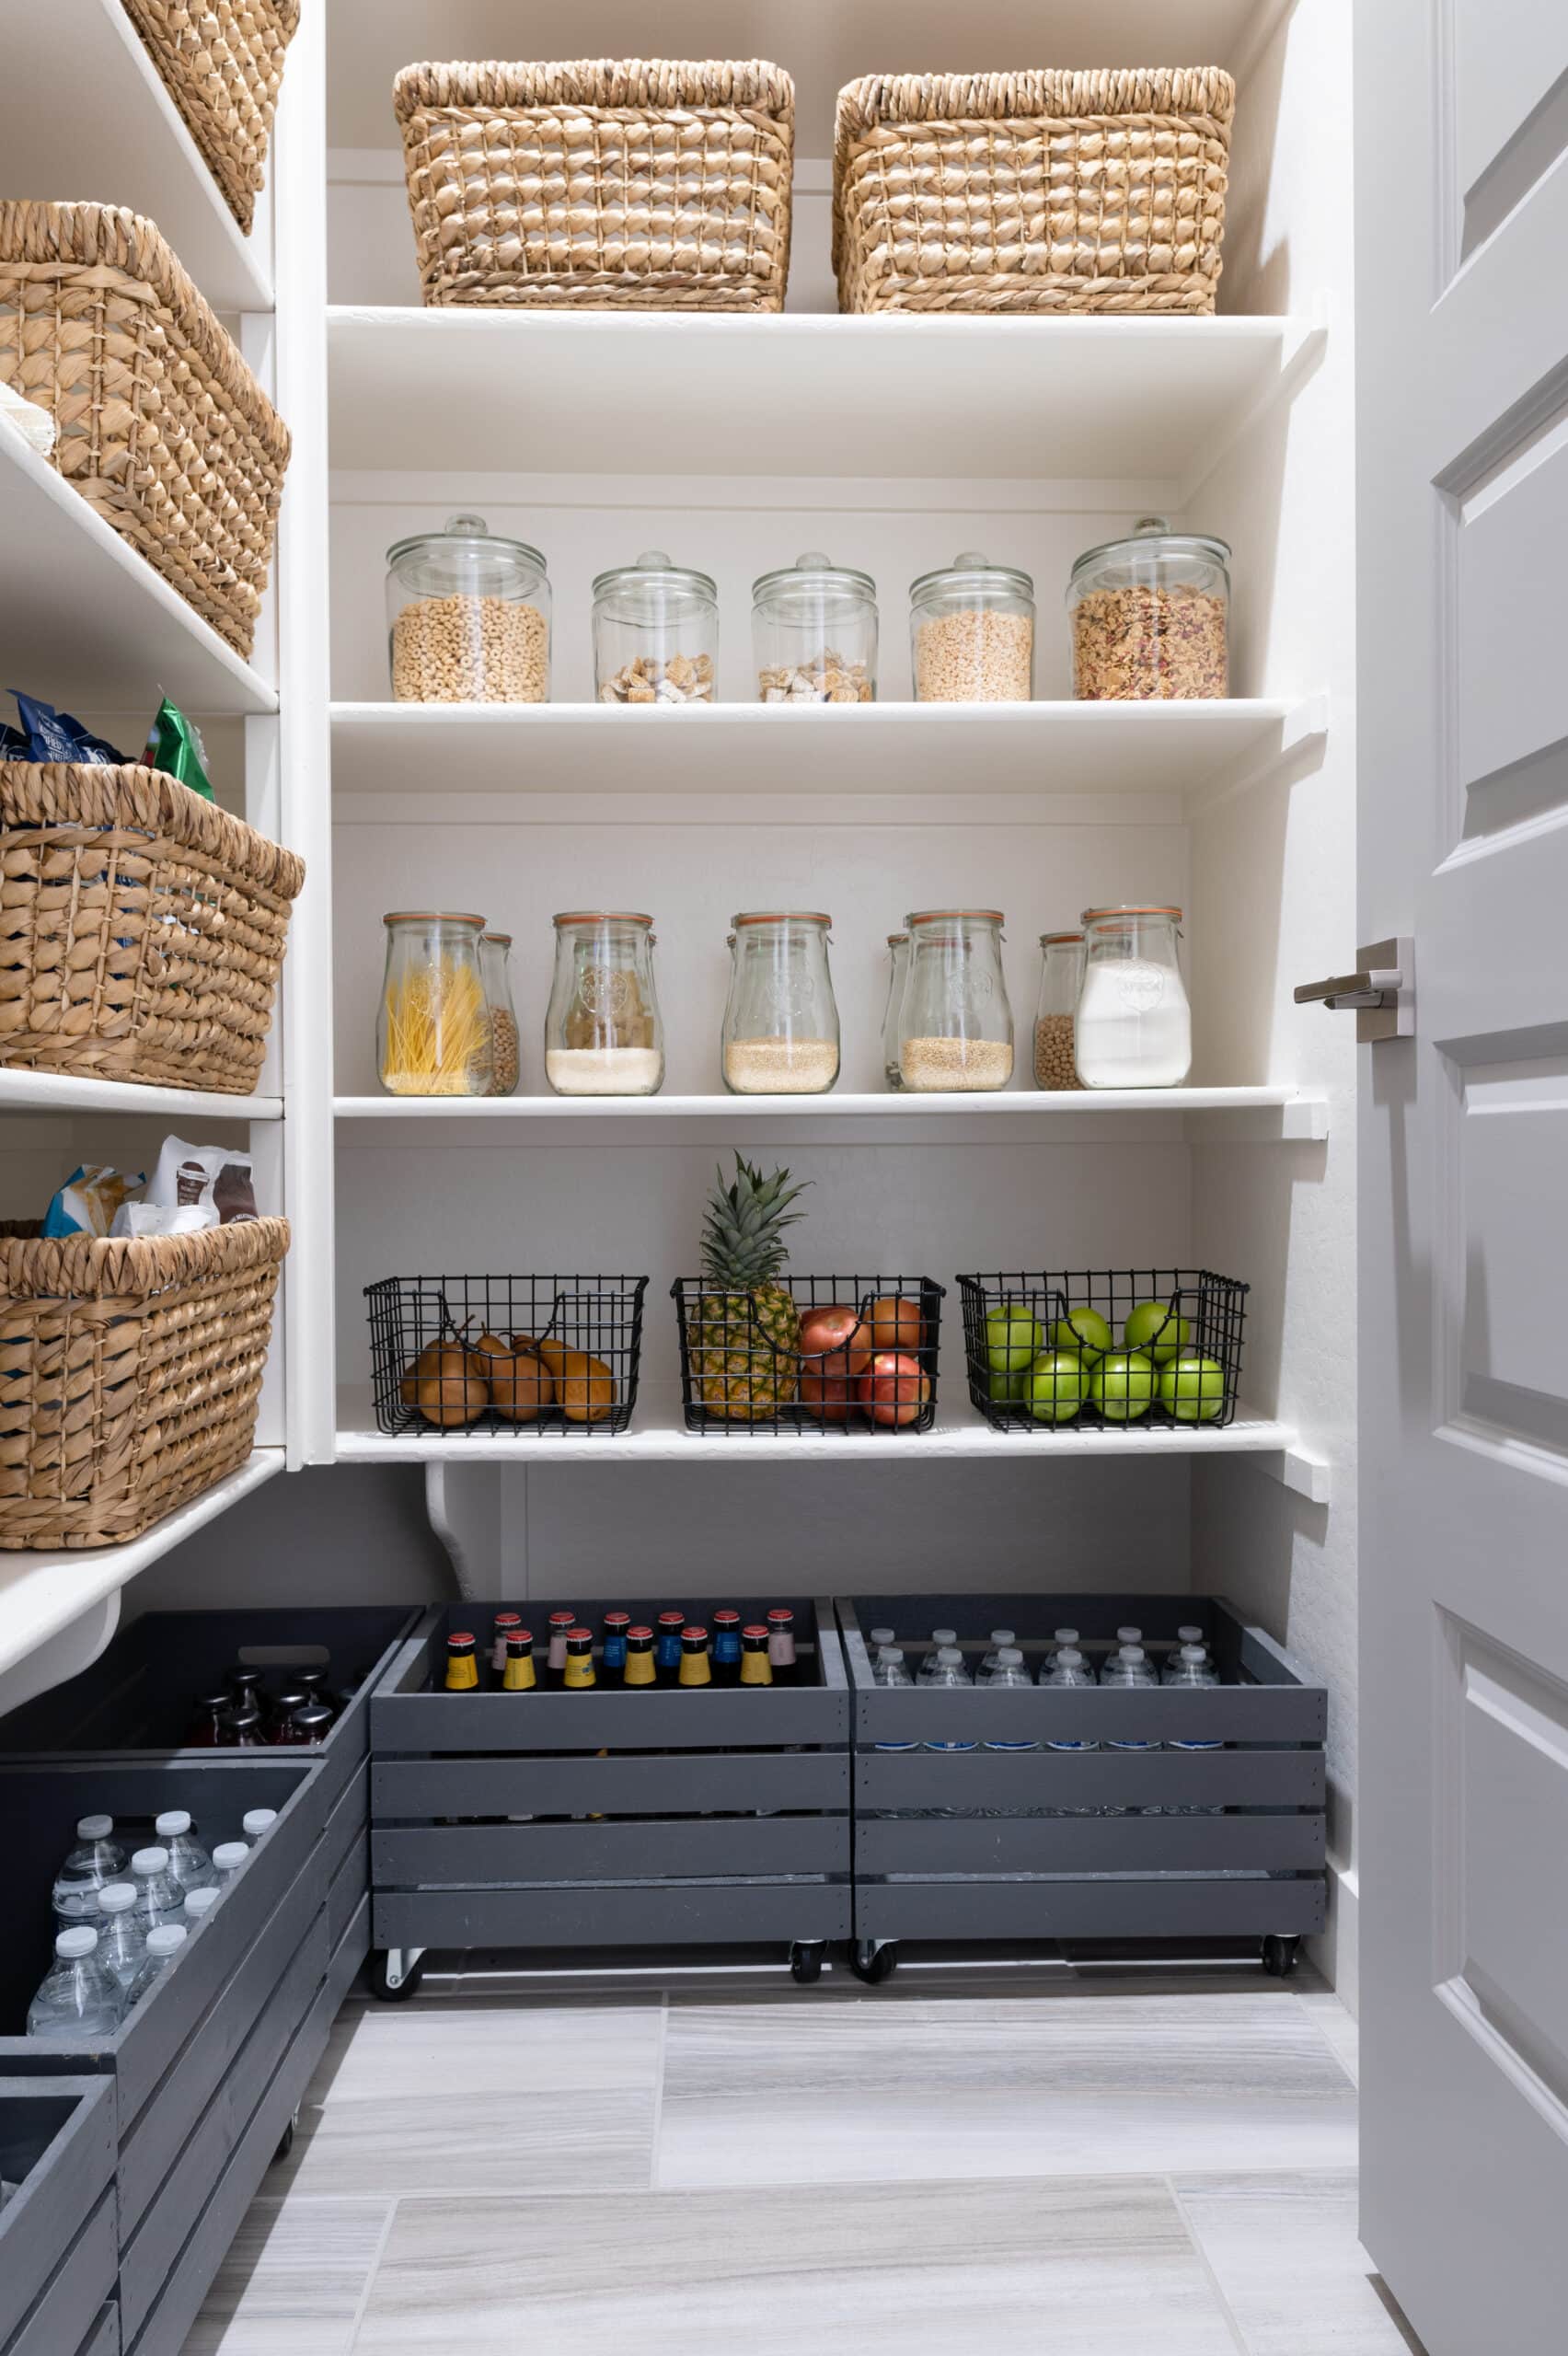 15 Pretty Pantry DIY Organization Hacks- The perfect pantry is both functional, and beautiful. Check out these pretty pantry organization ideas to inspire your next pantry makeover! | #pantry #organization #organizingTips #kitchenOrganization #ACultivatedNest